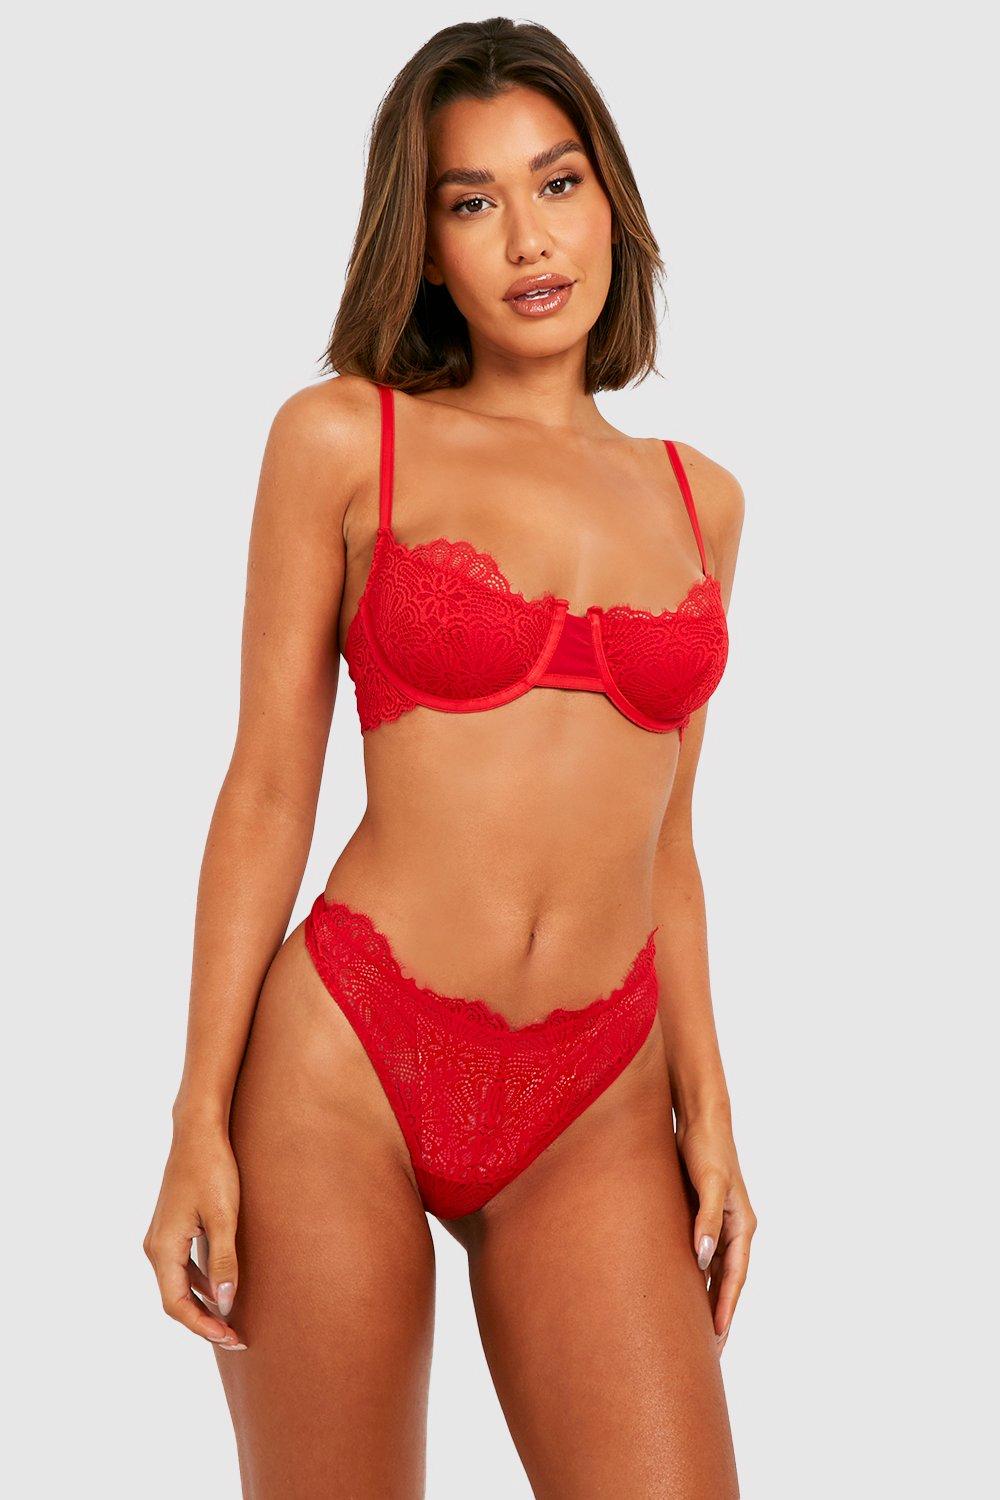 Fuller Bust Satin And Lace Trim Bra